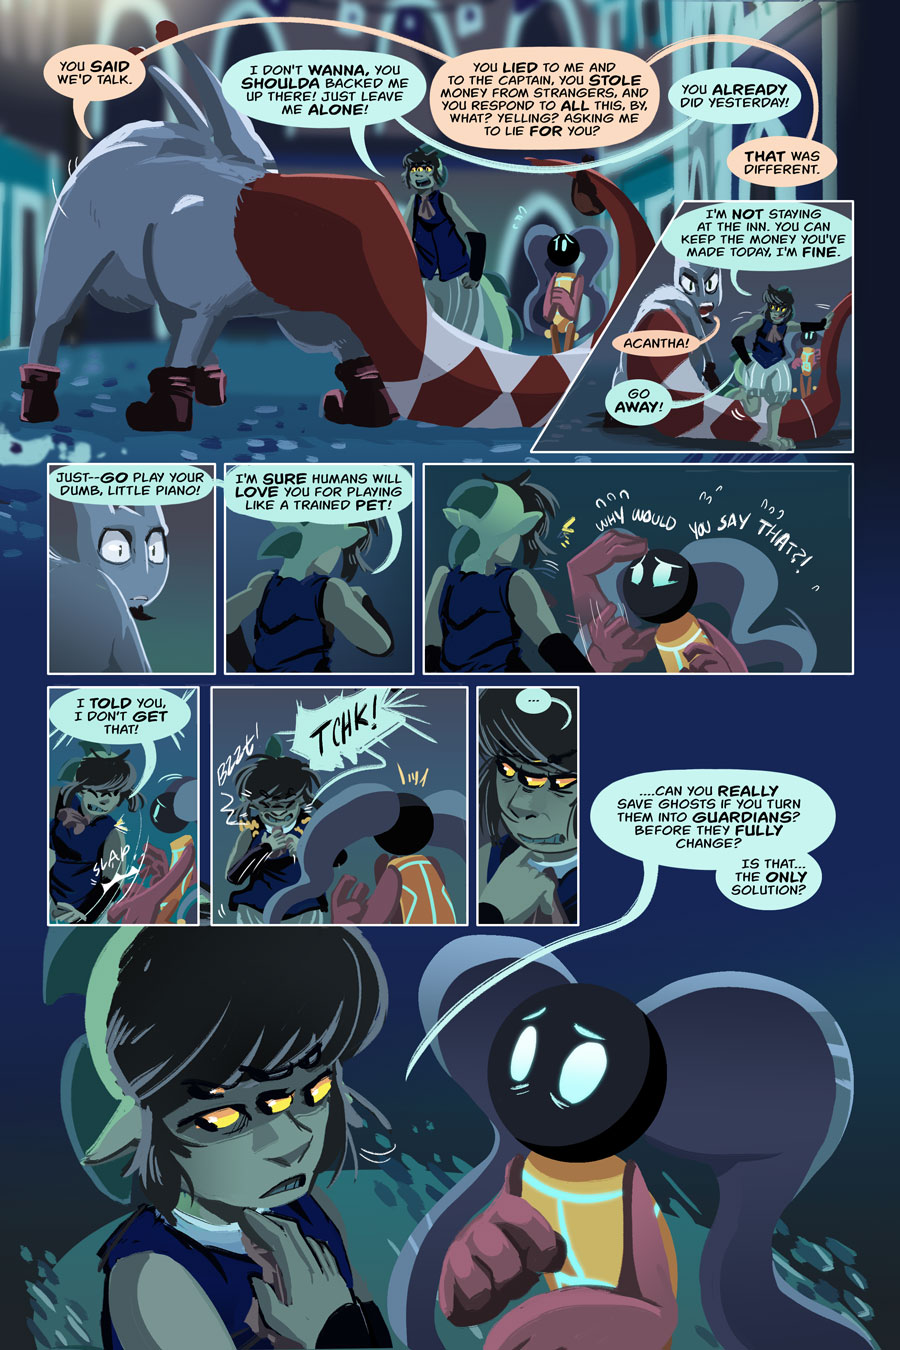 Chapter 8, page 43